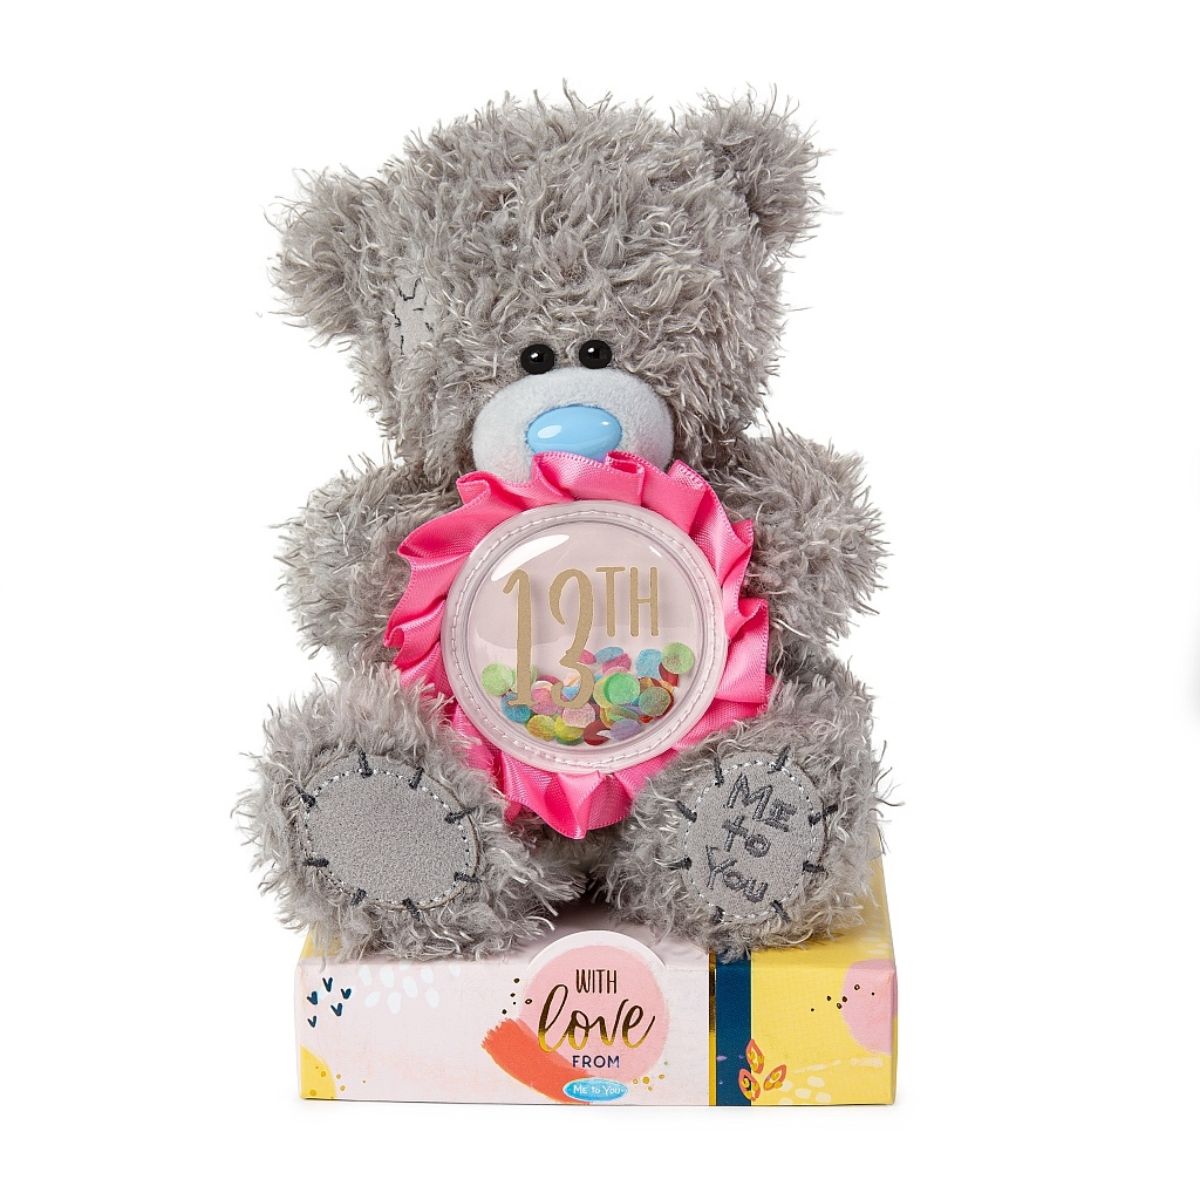 Me To You Bear with grey fur and blue nose sitting on box packaging with text reading With love From. Bear is holding a pink 13th rosette.